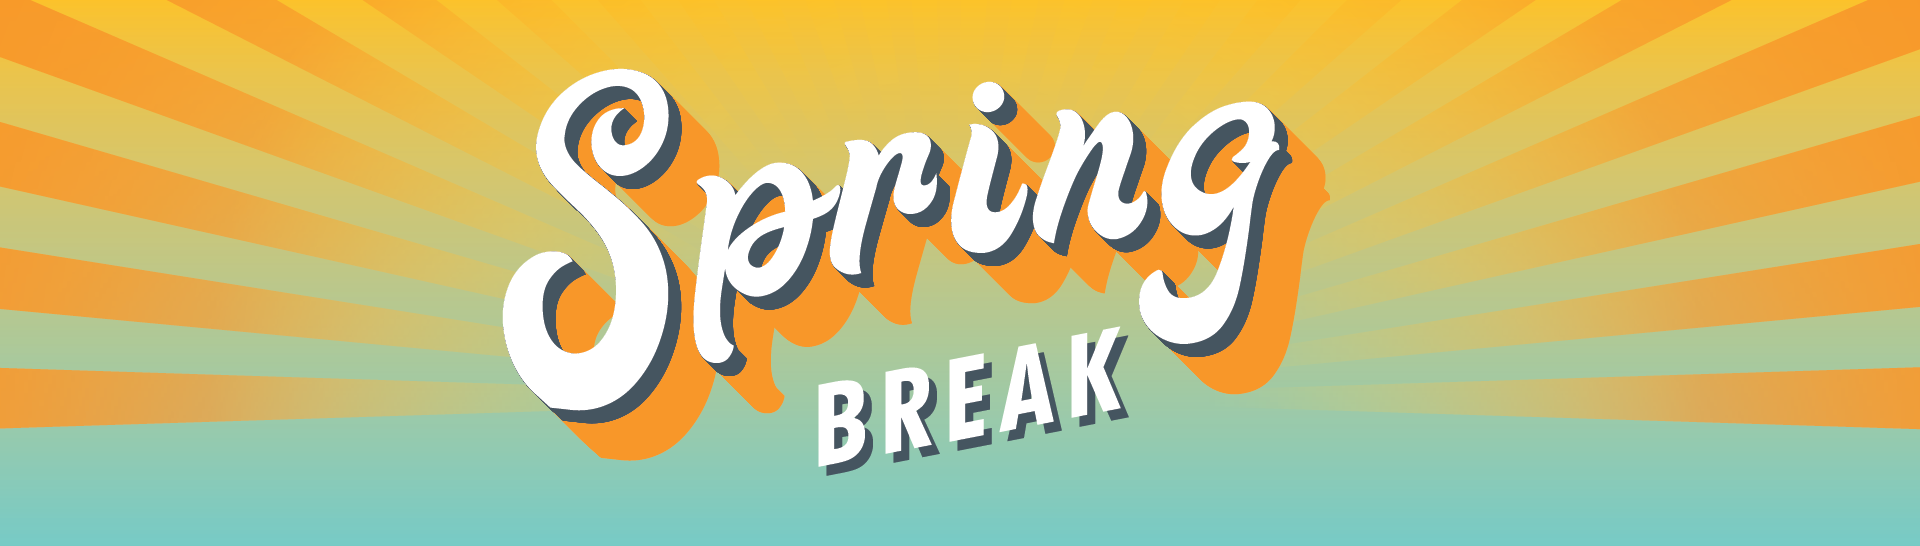 UPDATED SPRING BREAK: Friday, March 20 and Monday, March 23 to Friday, March 27